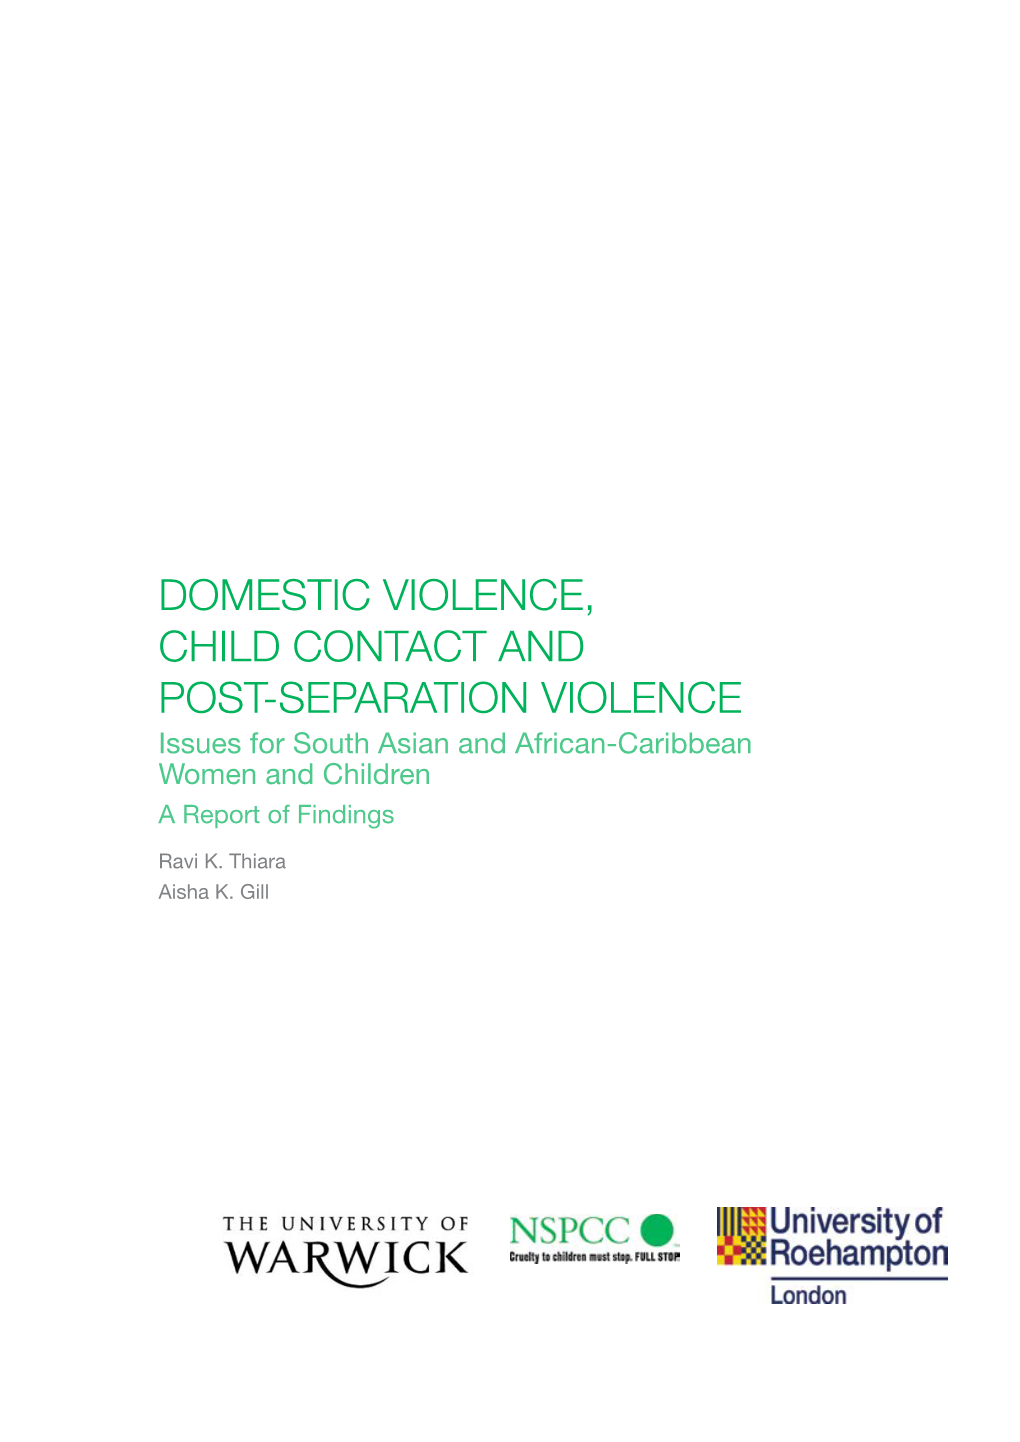 Domestic Violence, Child Contact, Post-Separation Violence